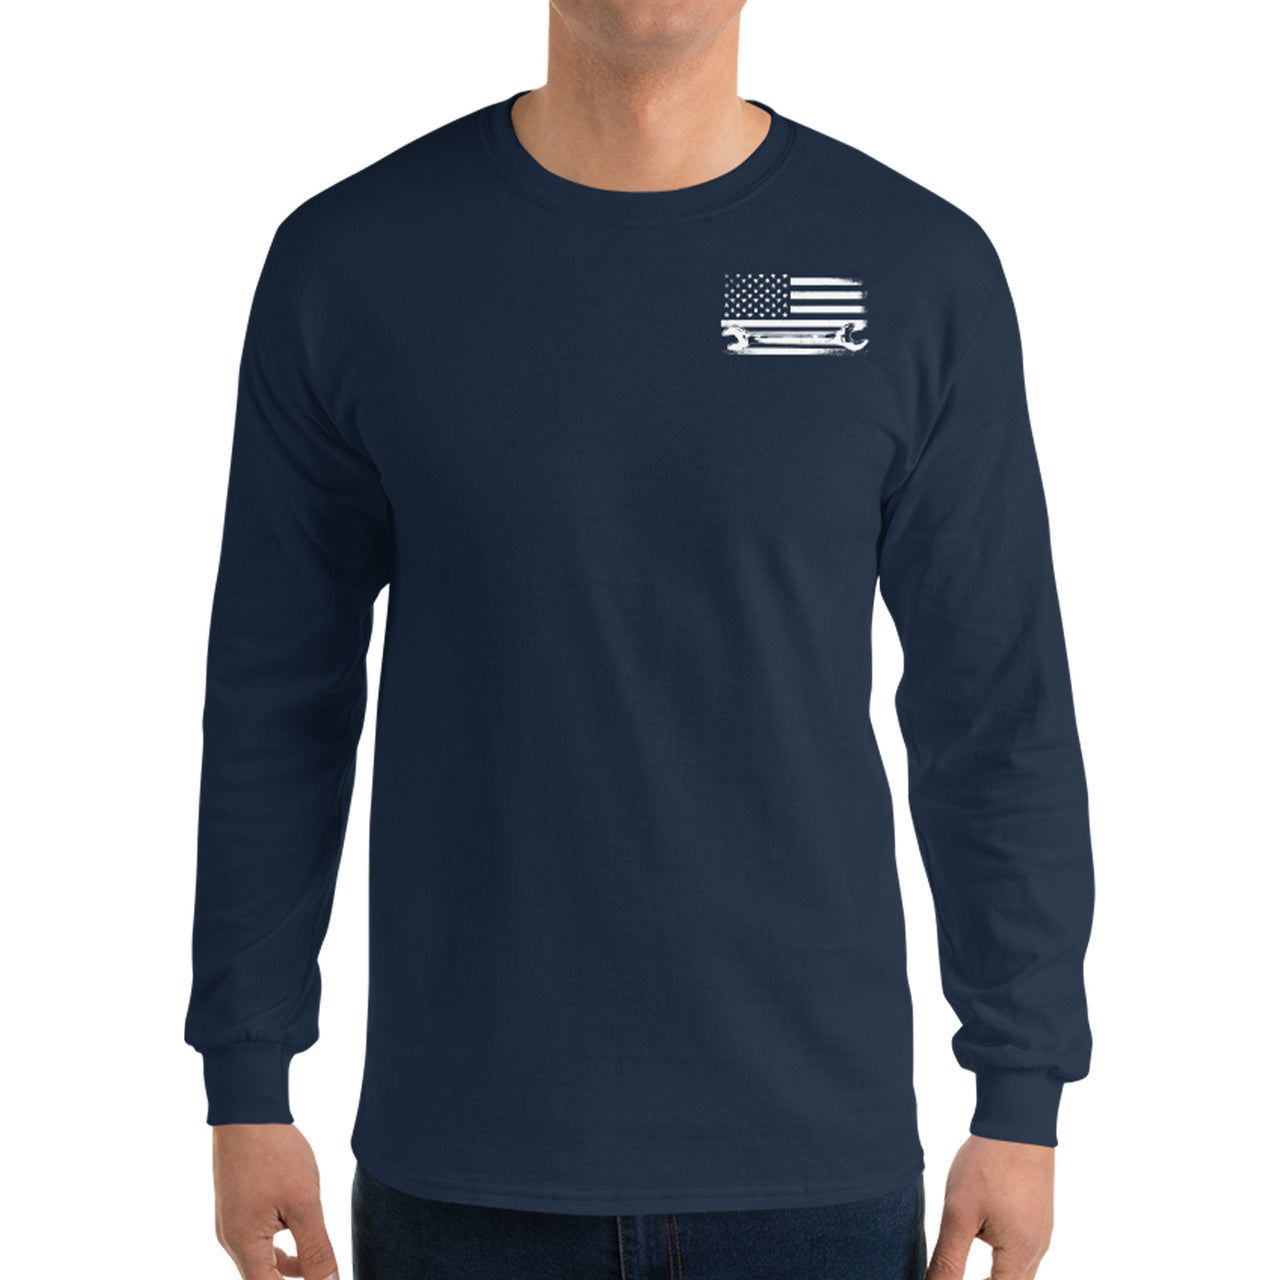 Diesel Mechanic American Flag Long Sleeve T-Shirt modeled in navy front view